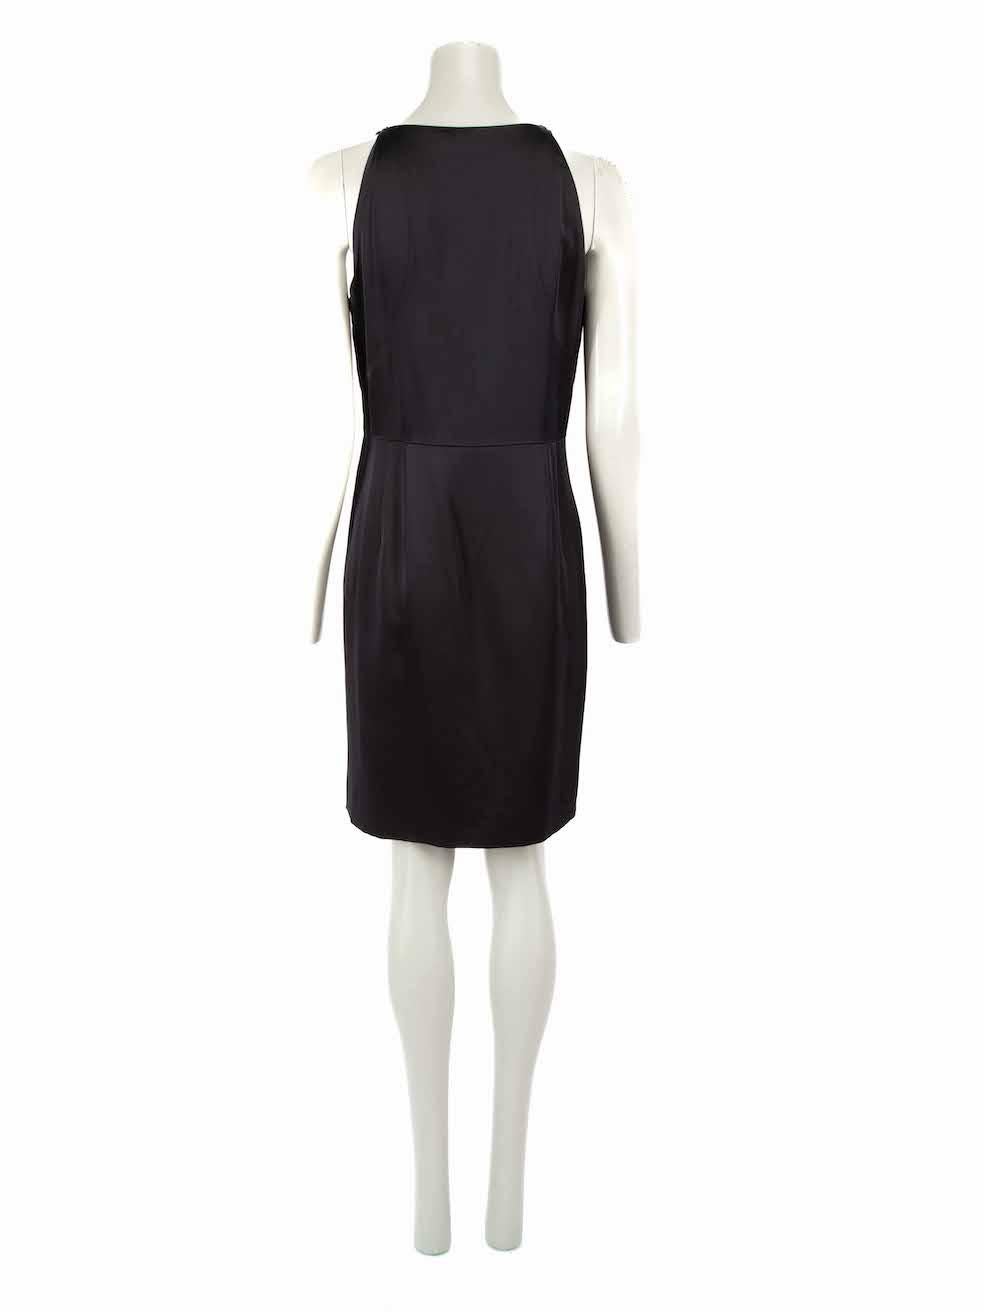 Jil Sander Black Shoulder Cut Out Mini Dress Size XXL In Good Condition For Sale In London, GB